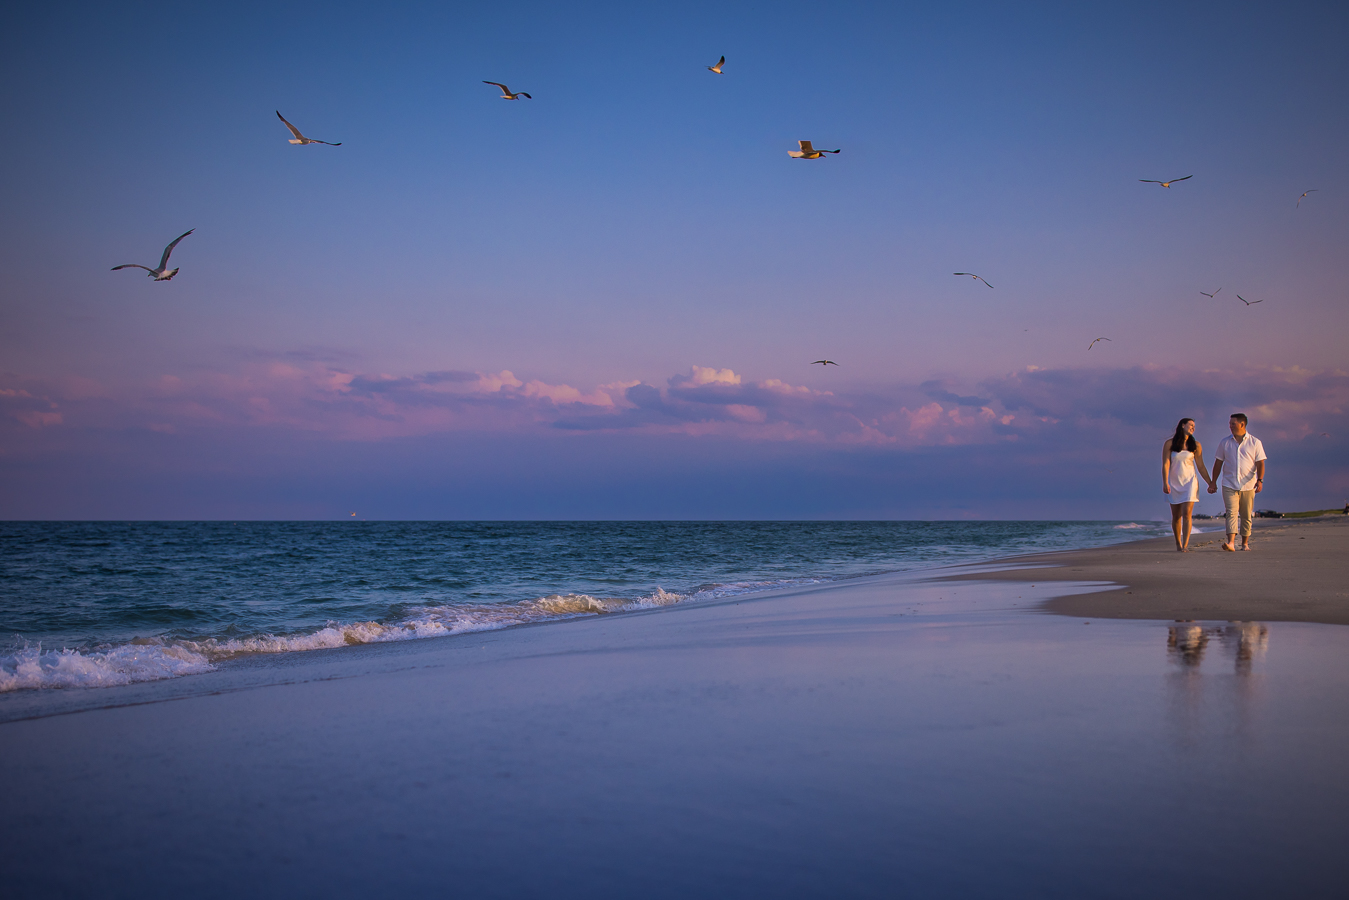 island beach state park photographer, lisa rhinehart, captures this vibrant, colorful image of the couple as they walk in the sand hand in hand looking each other by the ocean while the seagulls fly around them 